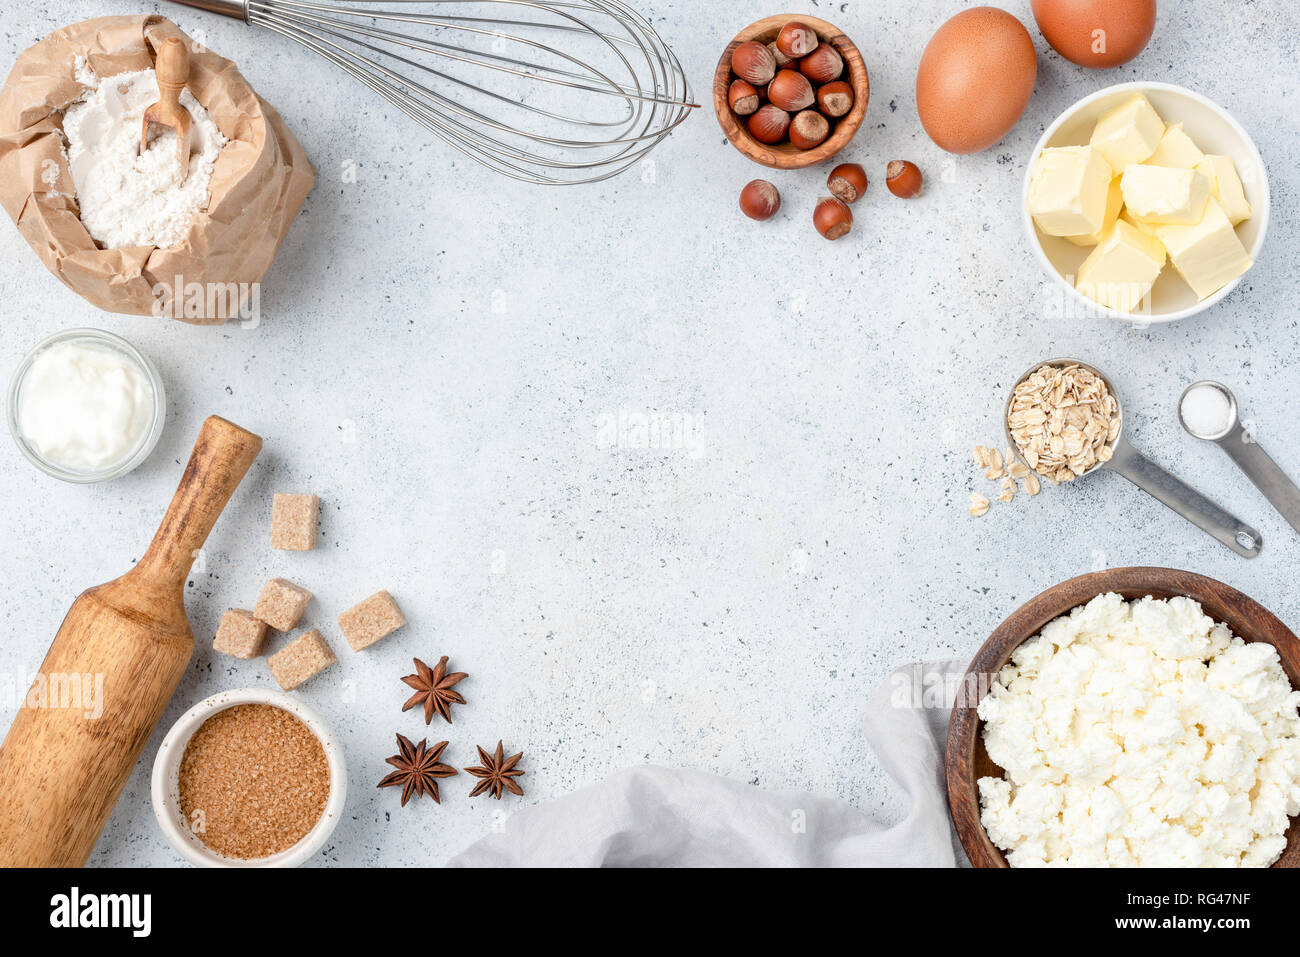 Baking concept, baking ingredients on background. Ingredients for baking cake, cookies, bread or pastry. Frame of cooking kitchen utensils and food Stock Photo